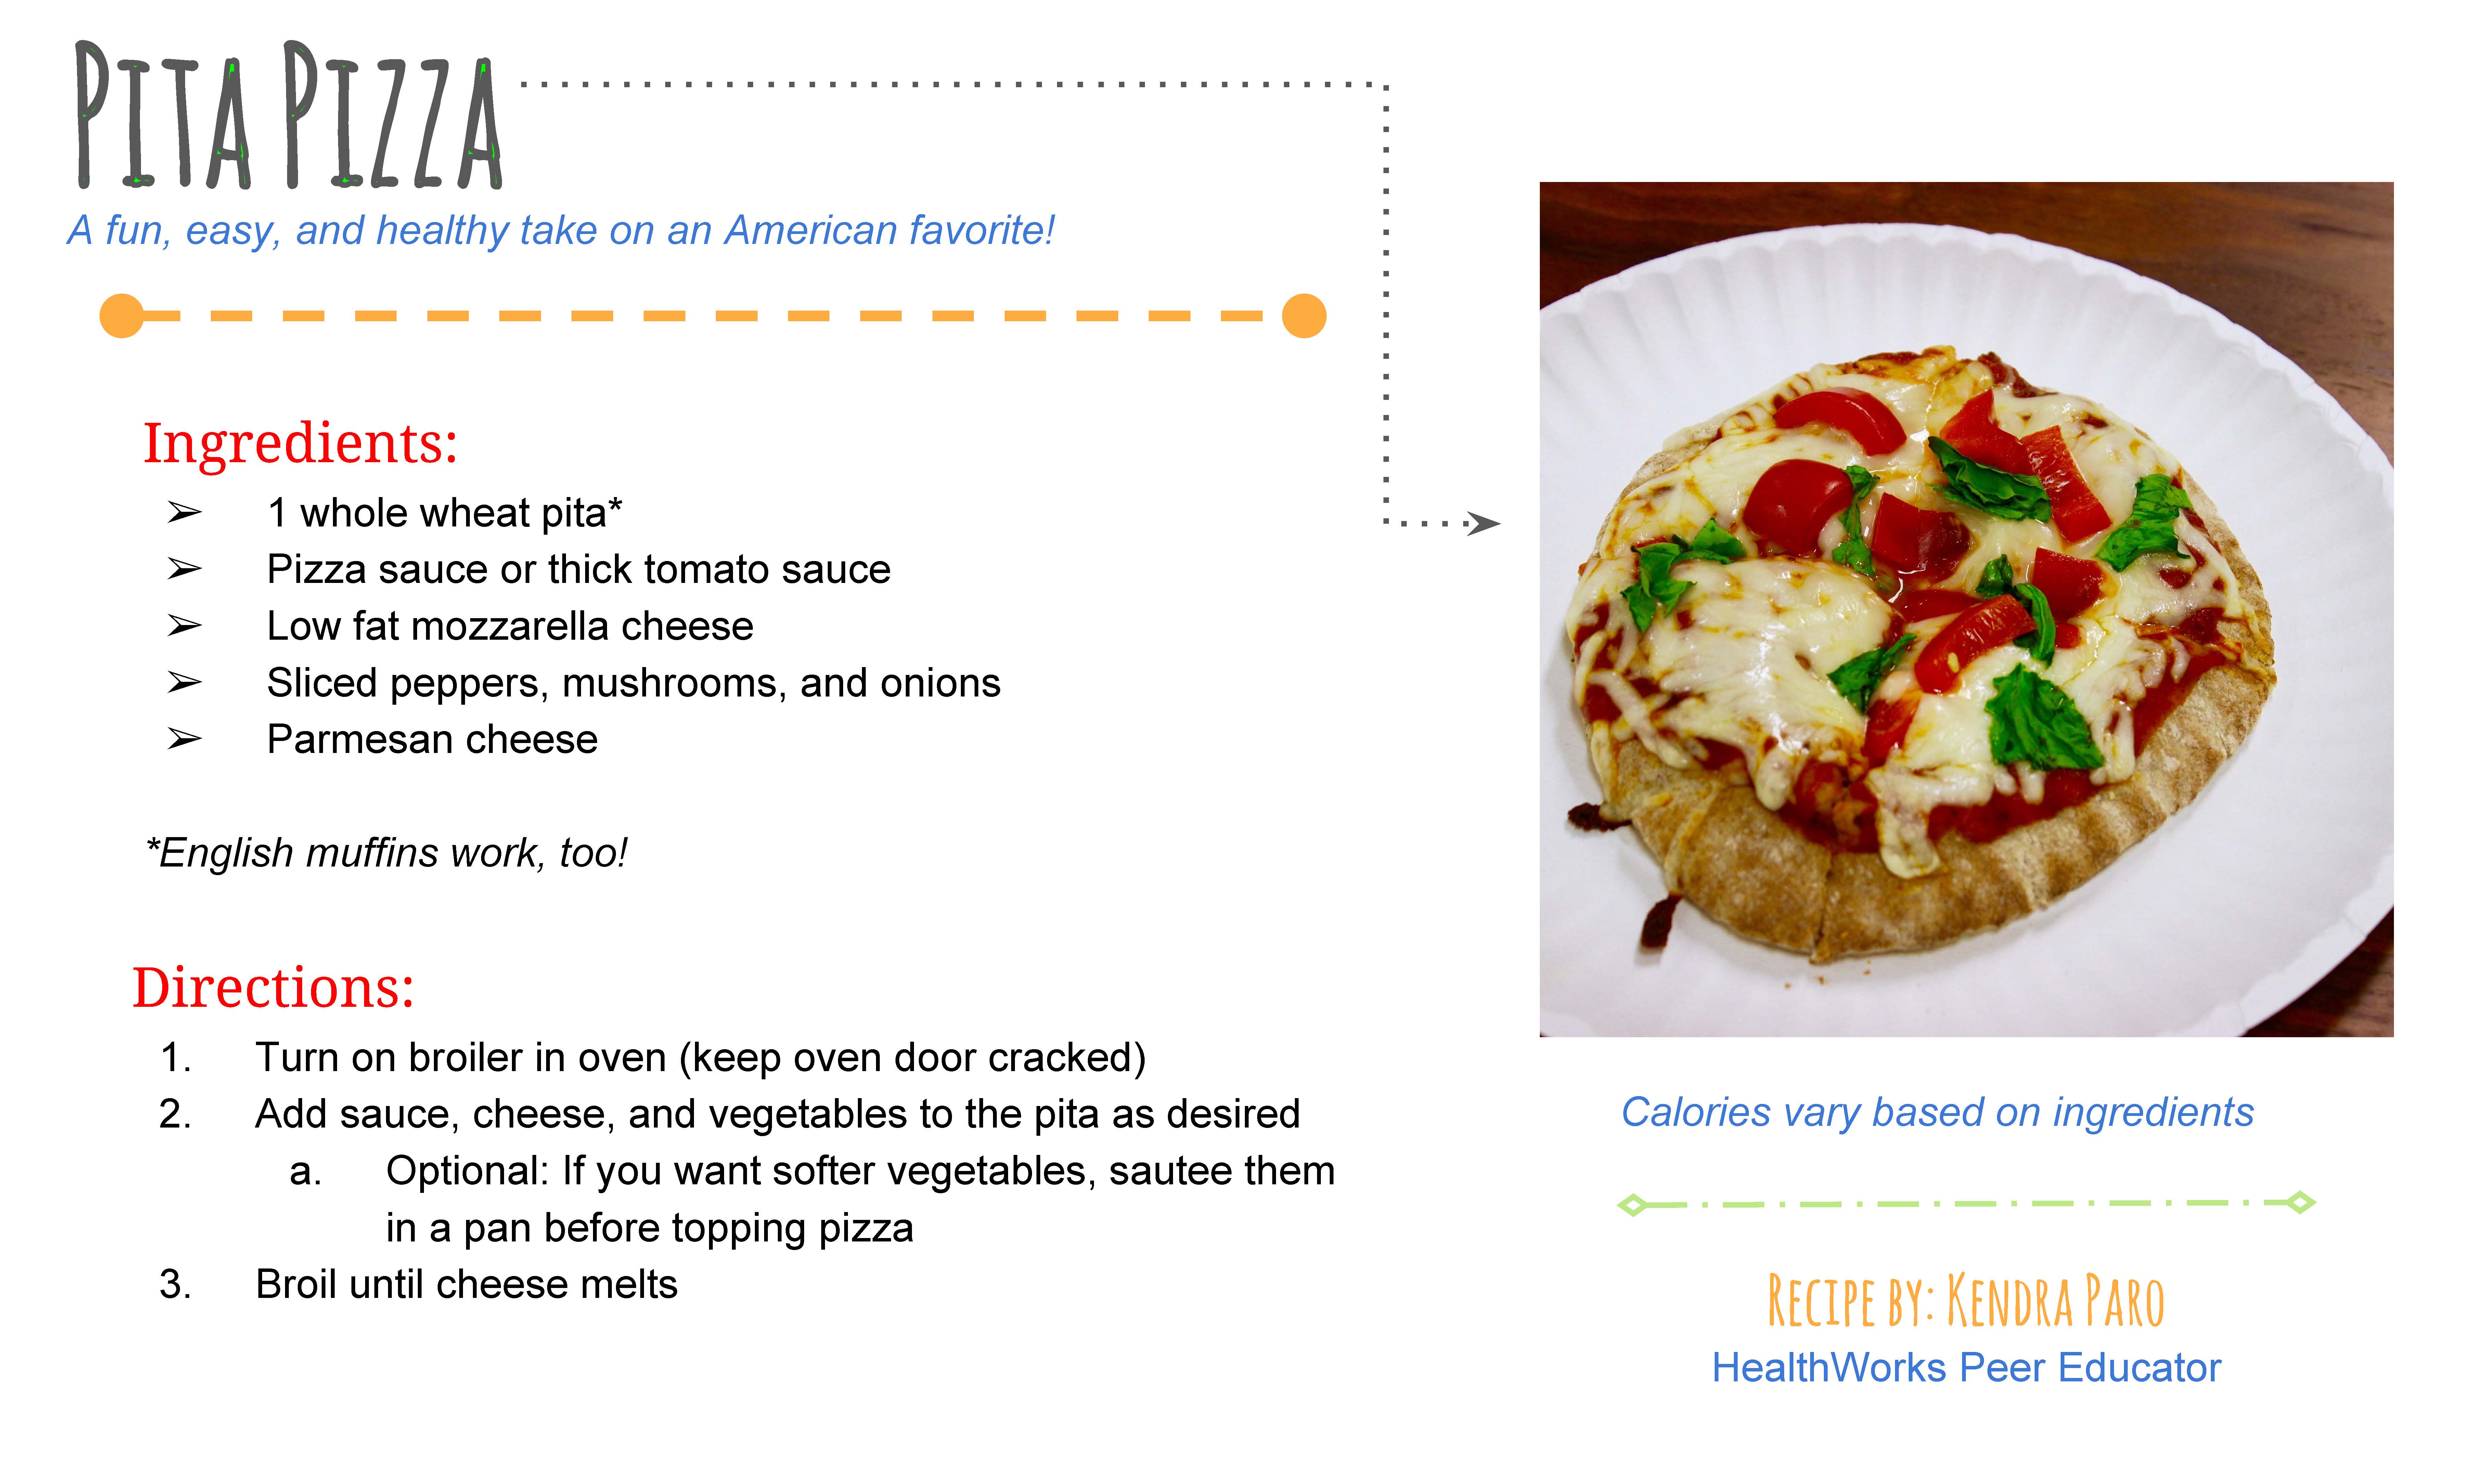 healthy-eating-pita-pizza-healthy-penn-state